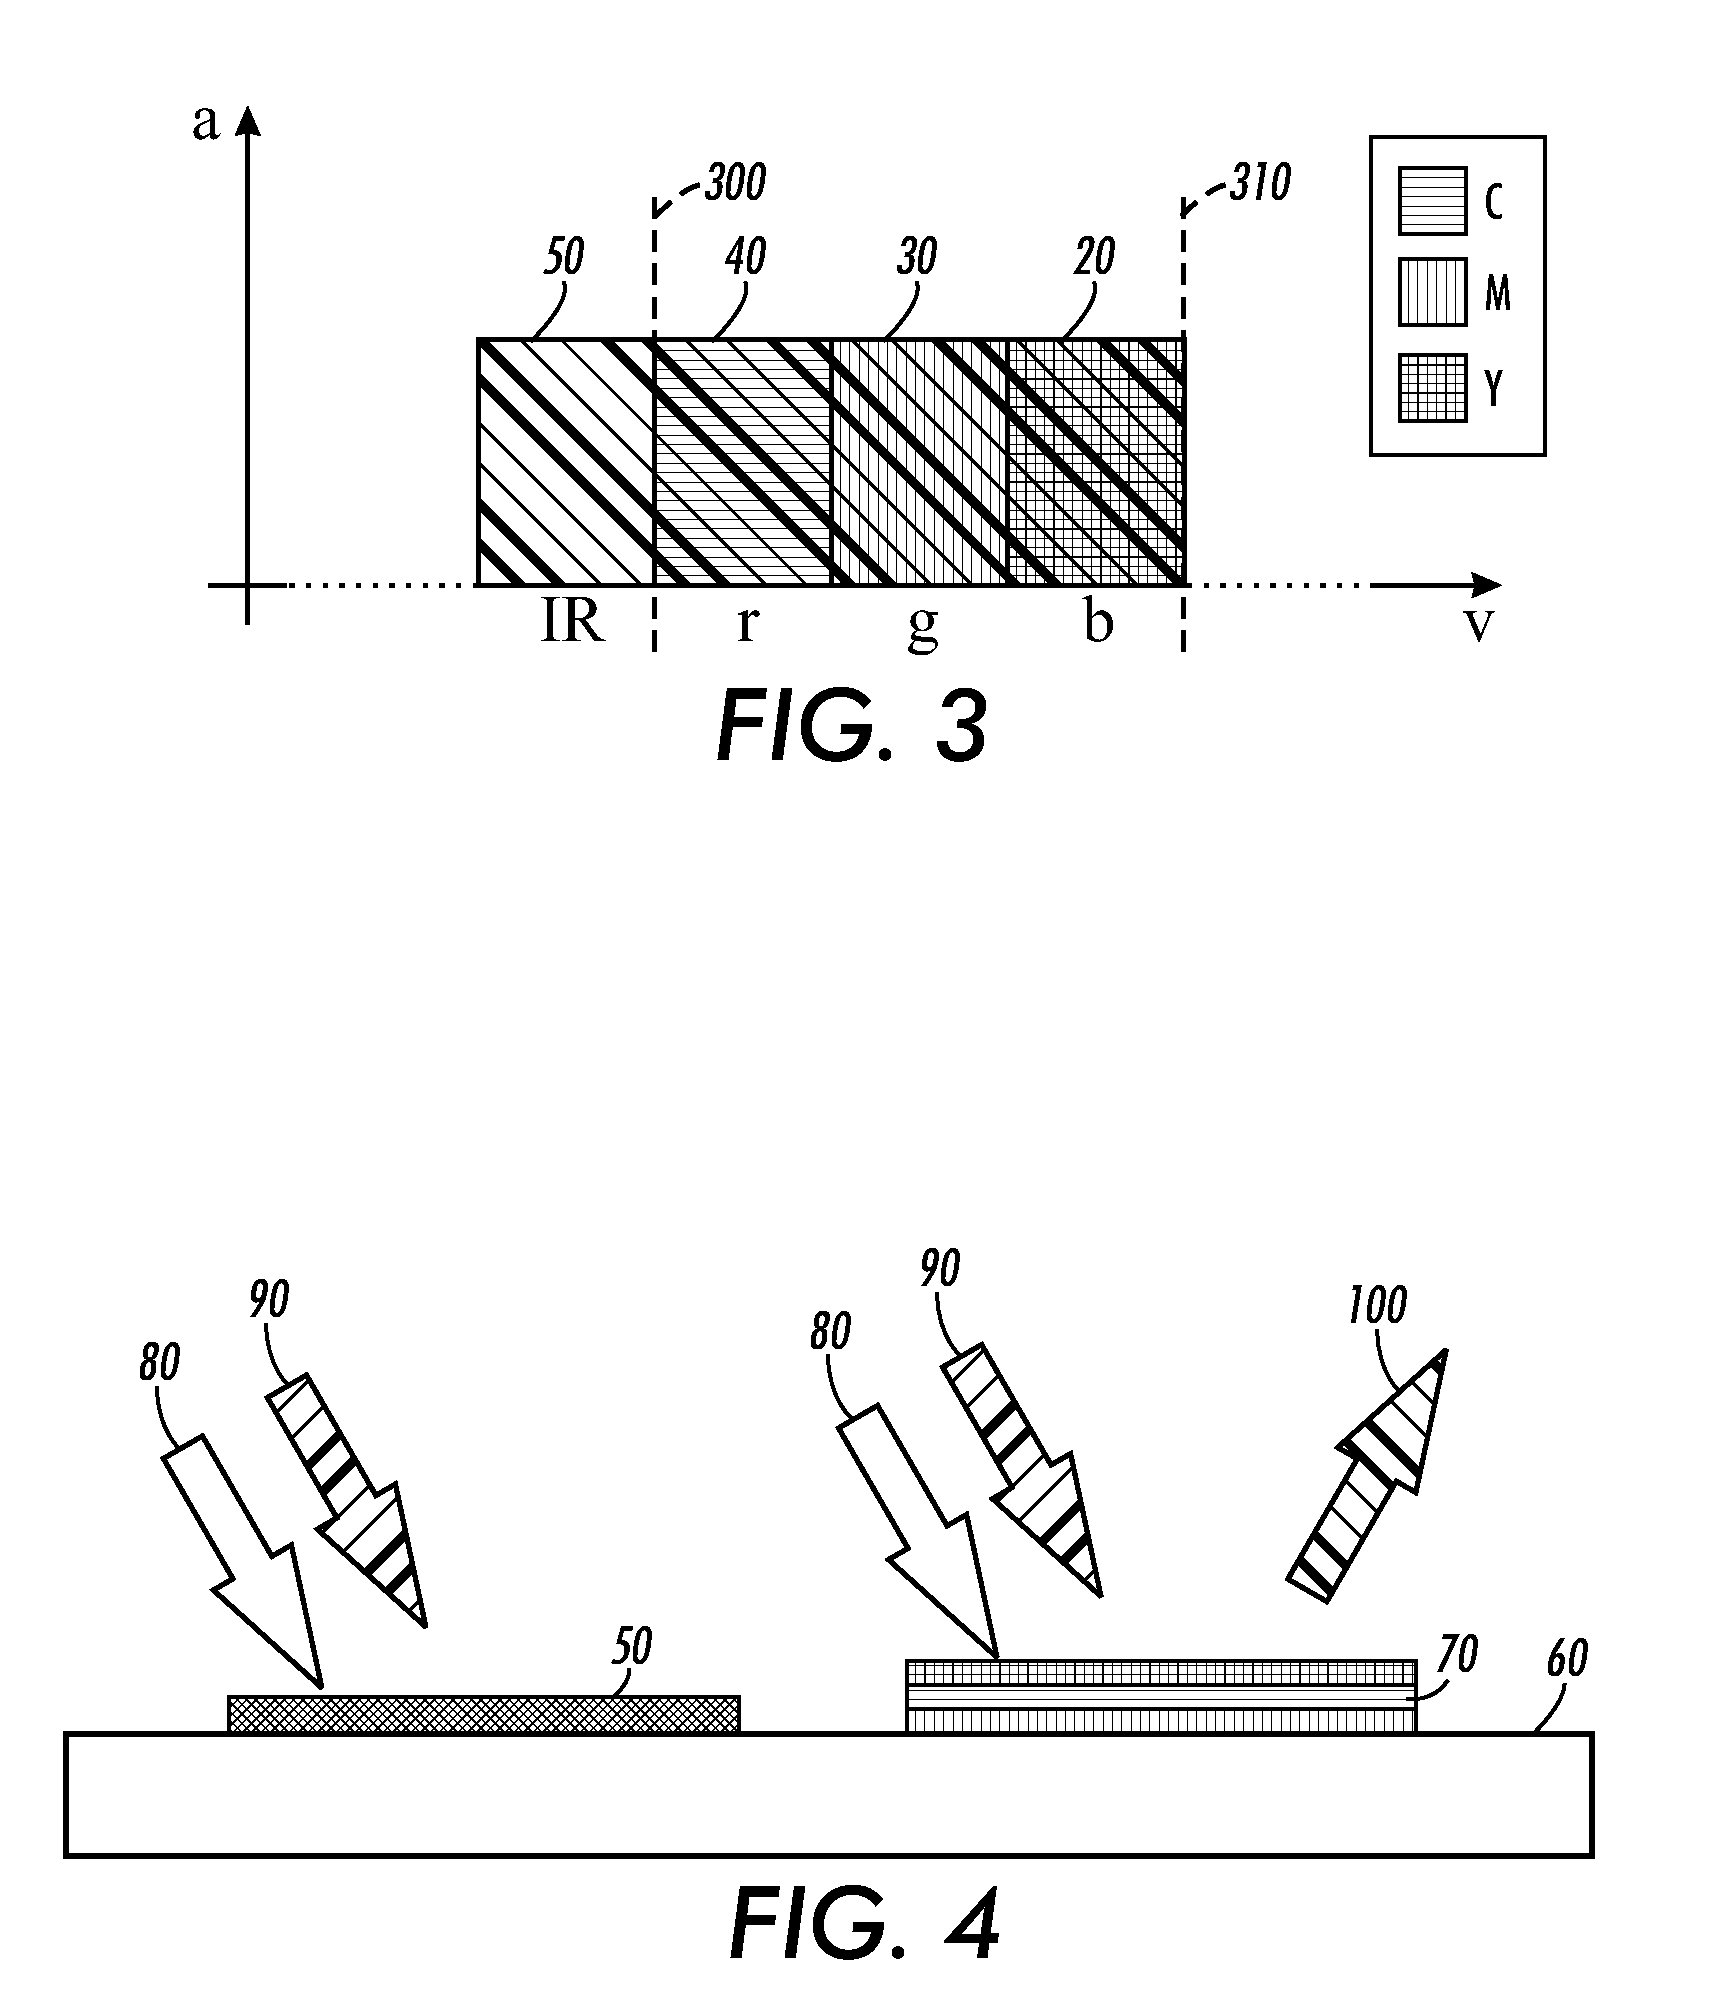 Infrared encoding of security elements using standard xerographic materials